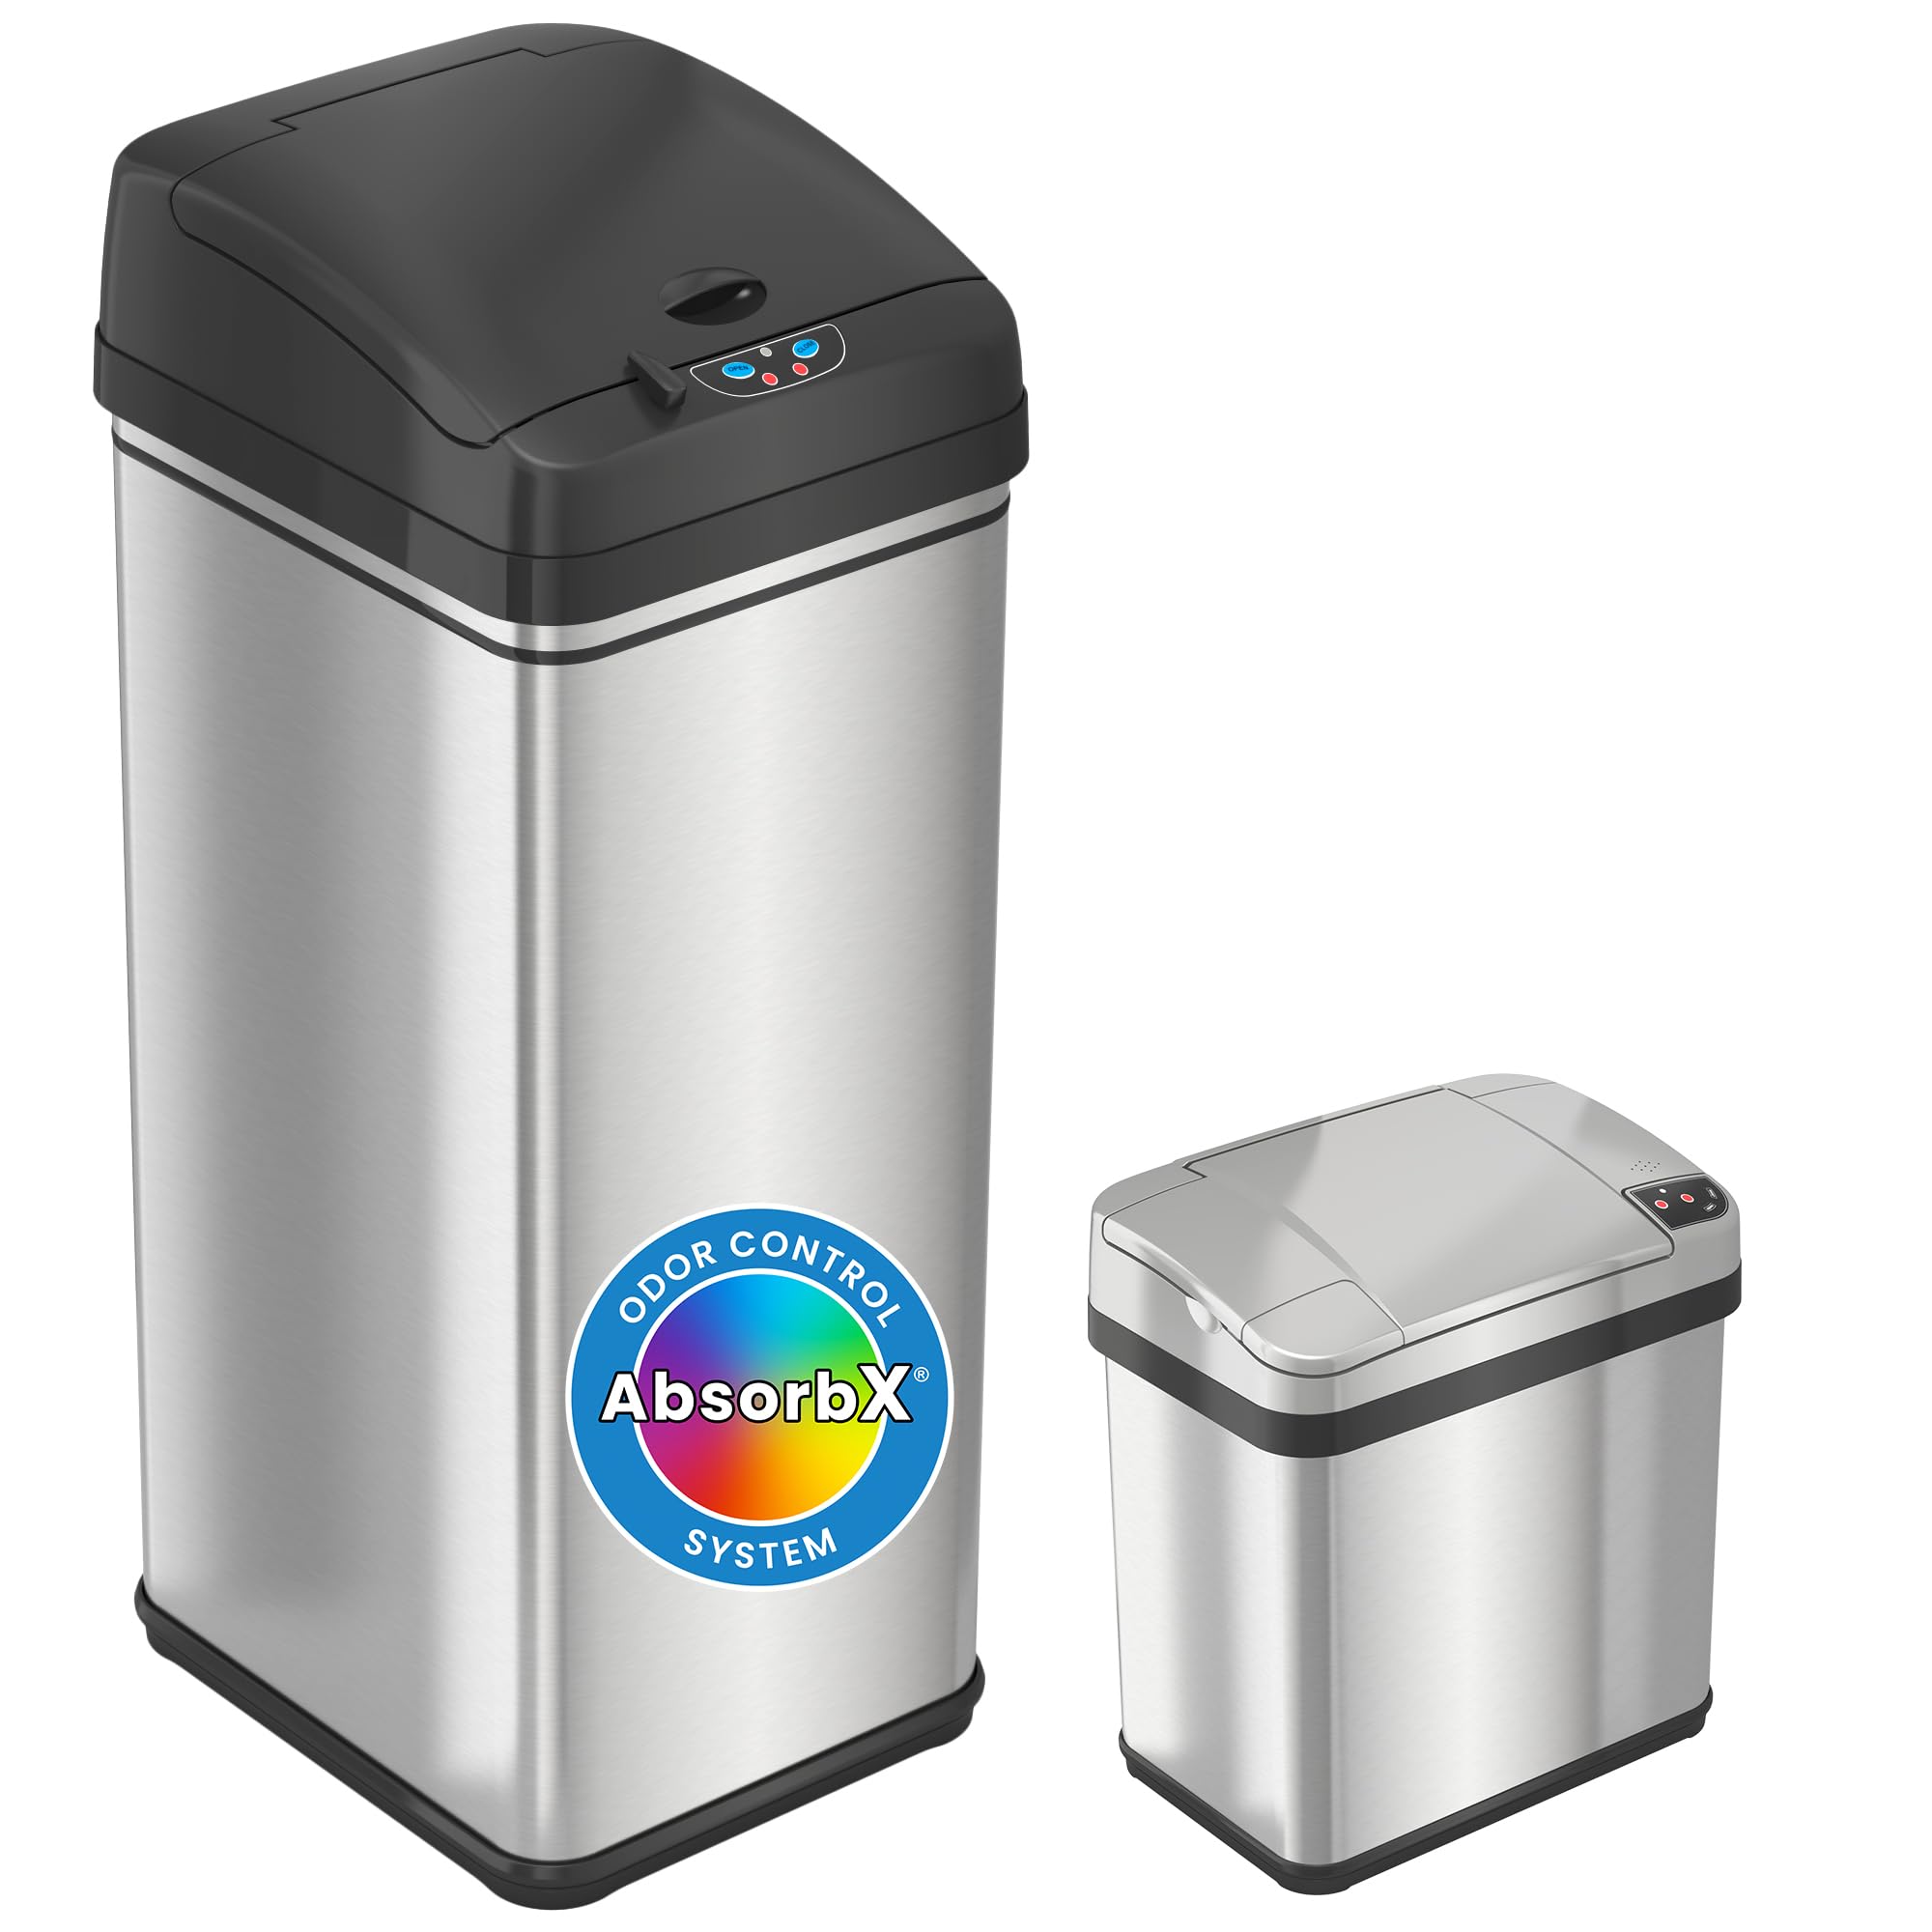 iTouchless Recycling 13 Gallon and 2.5 Gallon Sensor Trash Cans Bins for Kitchen and Bathroom, Odor Control System, 13, Stainless Steel (Set of 2), 2 Count